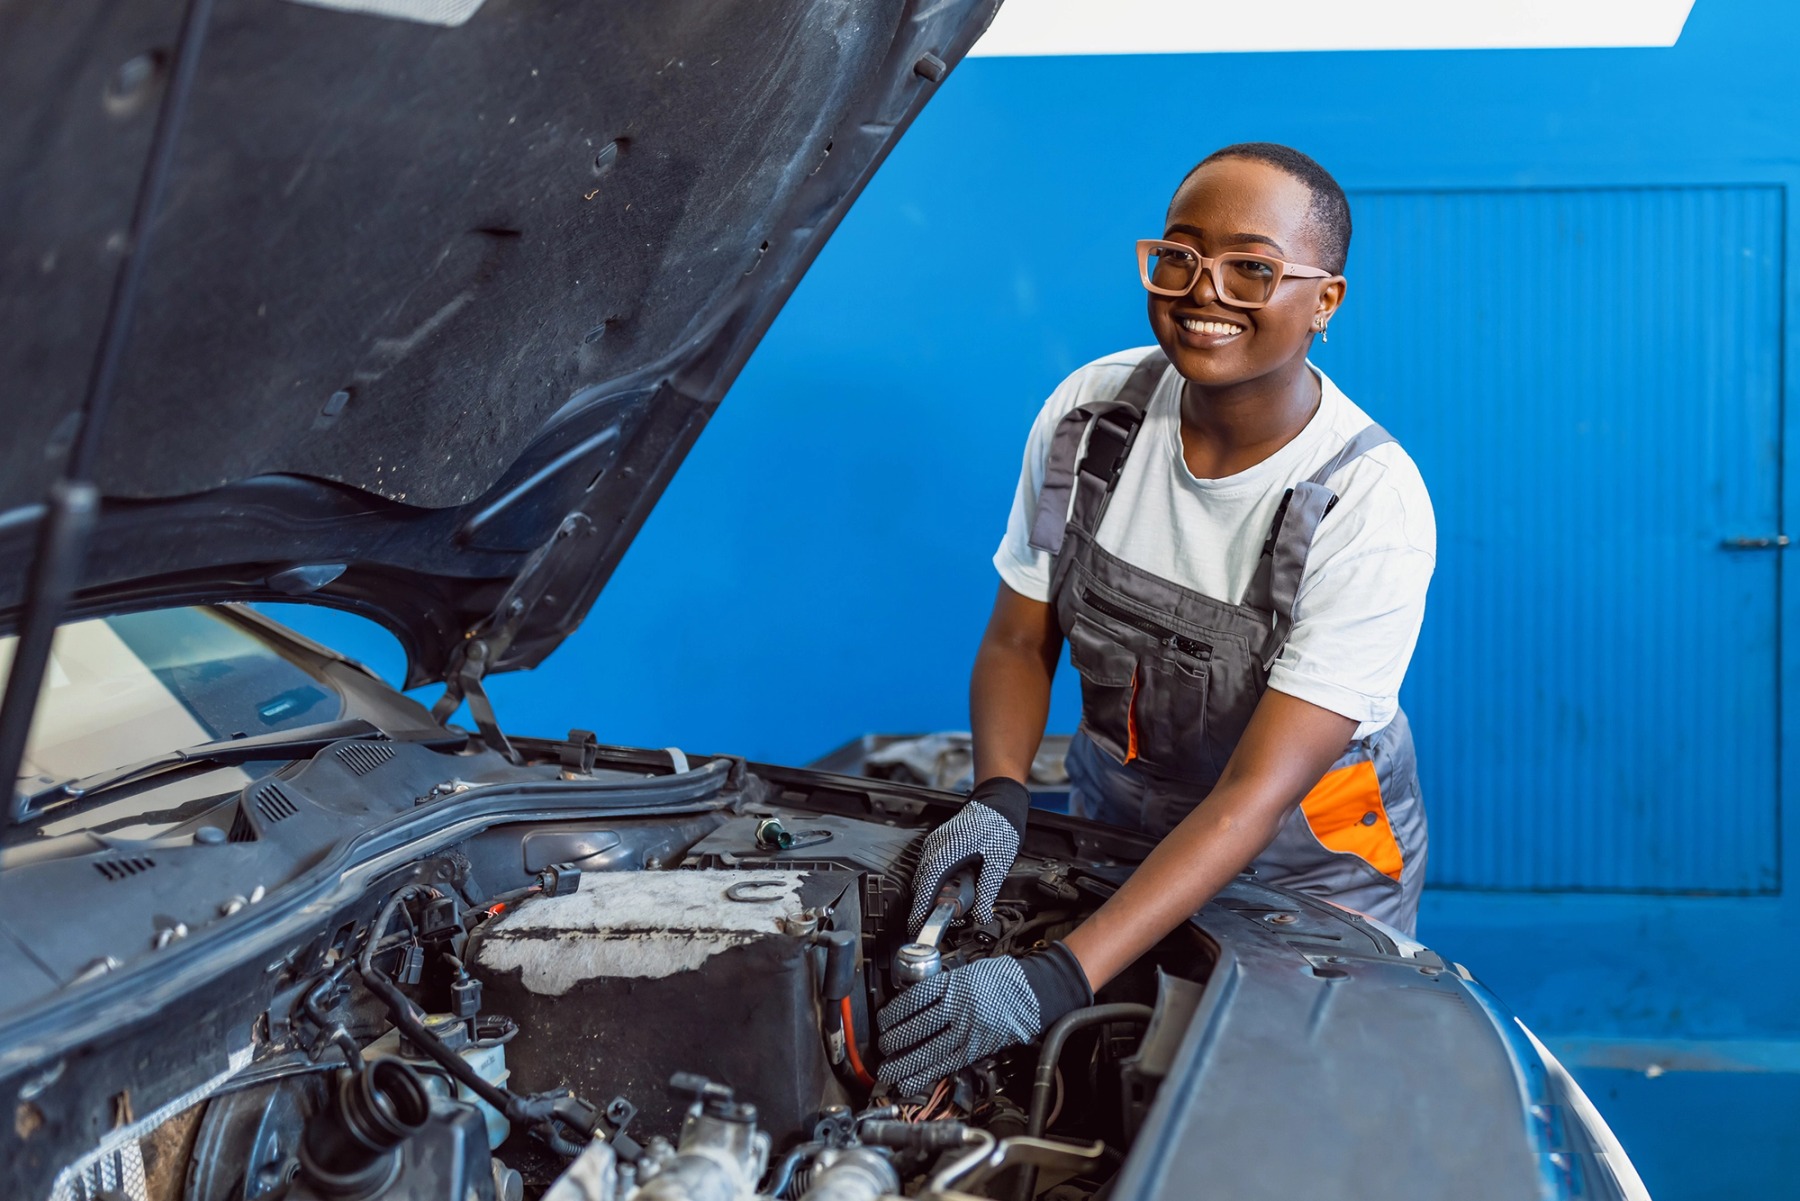 A person wearing glasses and overalls, with shaved head and earrings, works on a vehicle engine.